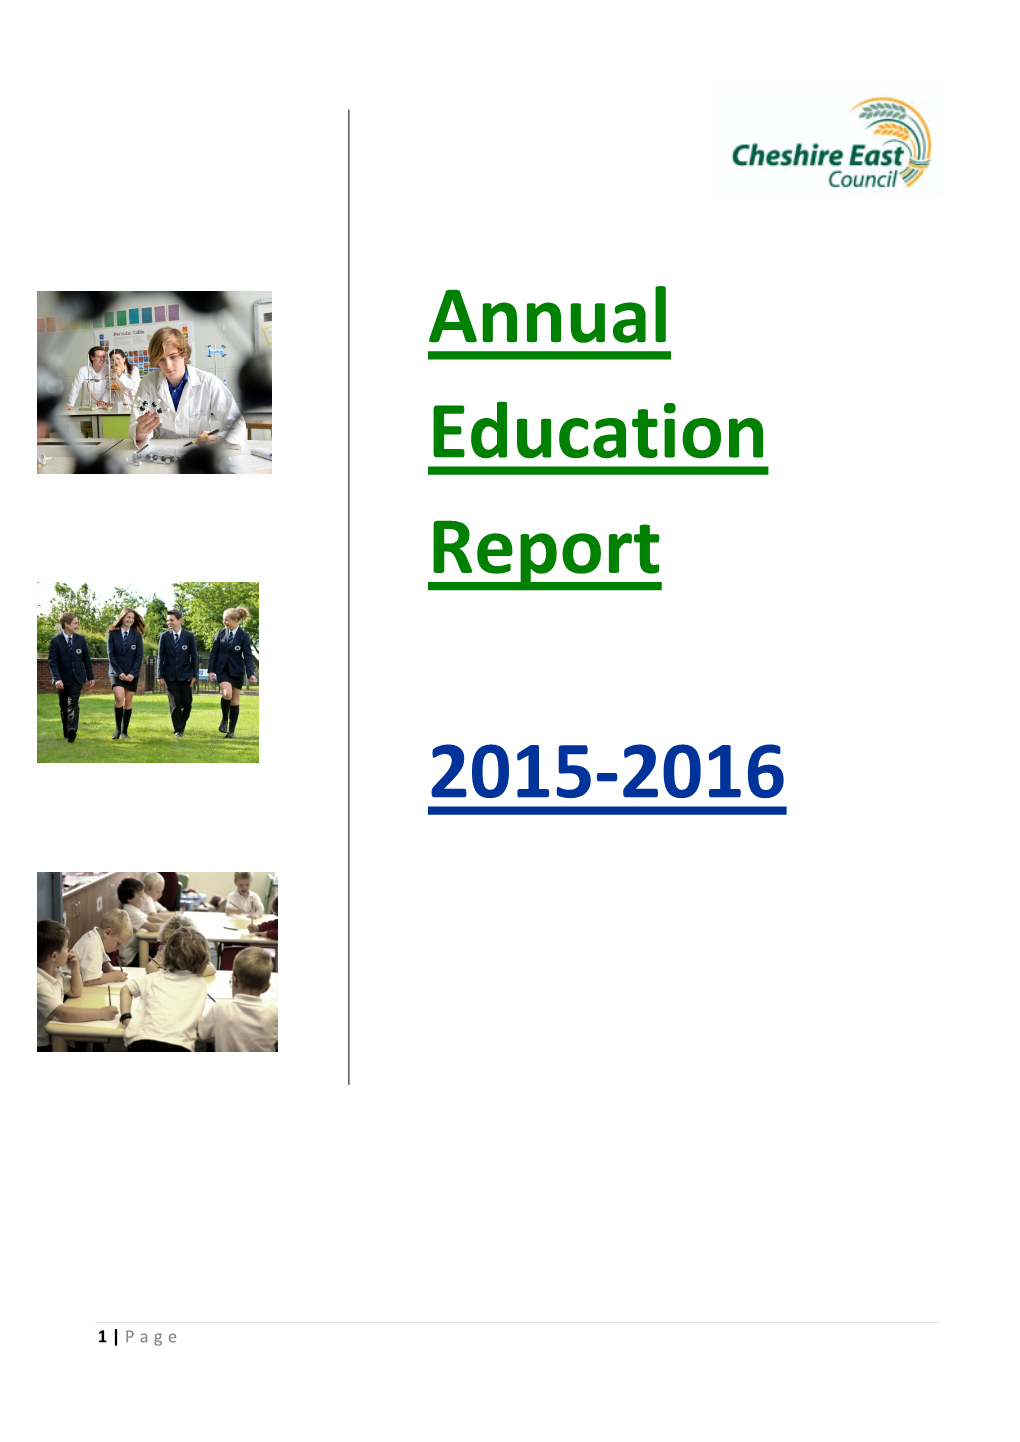 Annual Education Report 2015-2016